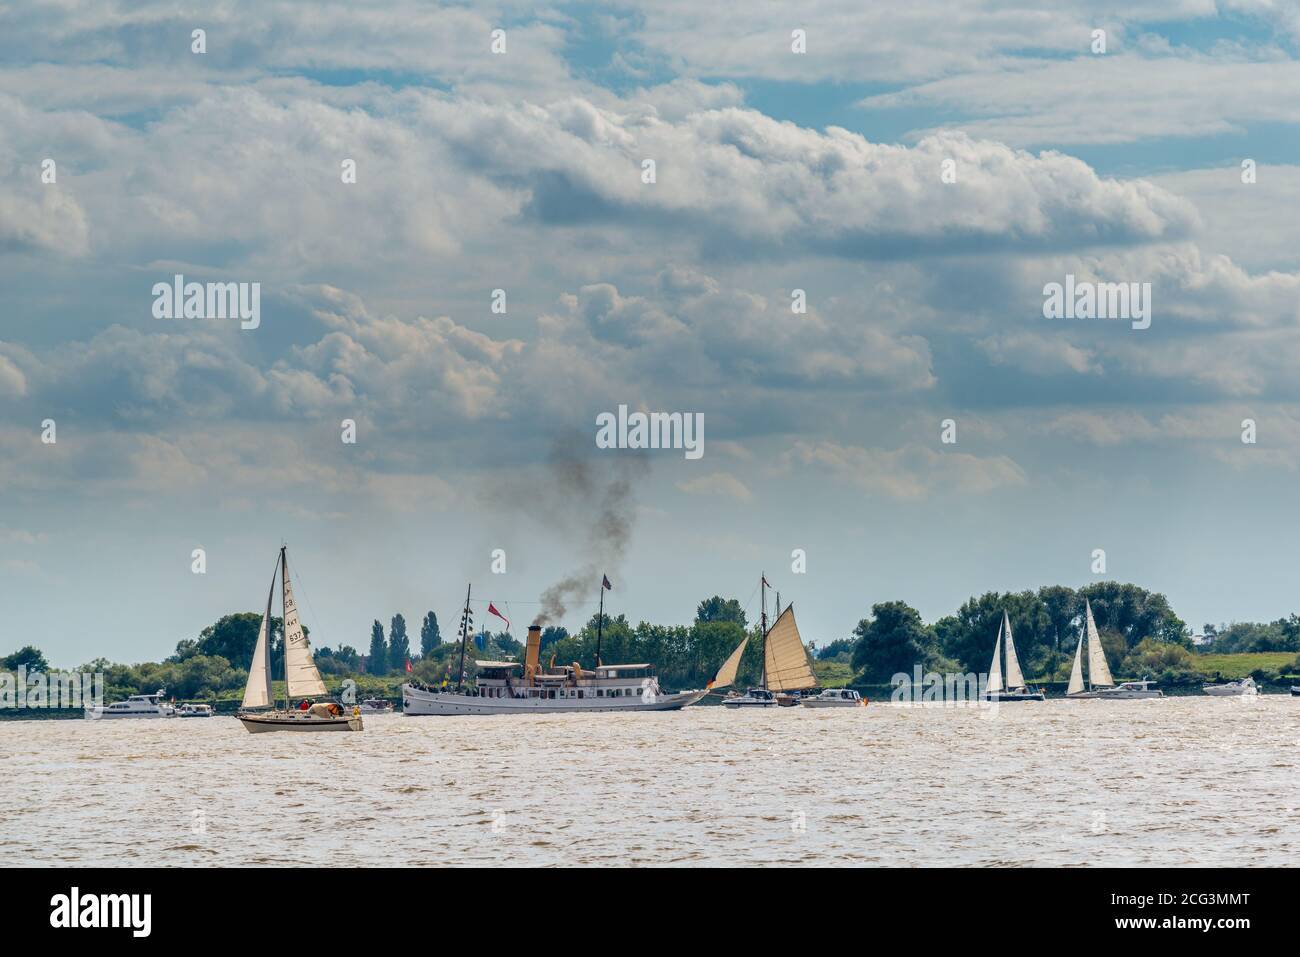 Yachts and the vintage steamer 'Scharhörn' on the Elbe River in front of the island Lühesand, Lower Saxony, Germany Stock Photo